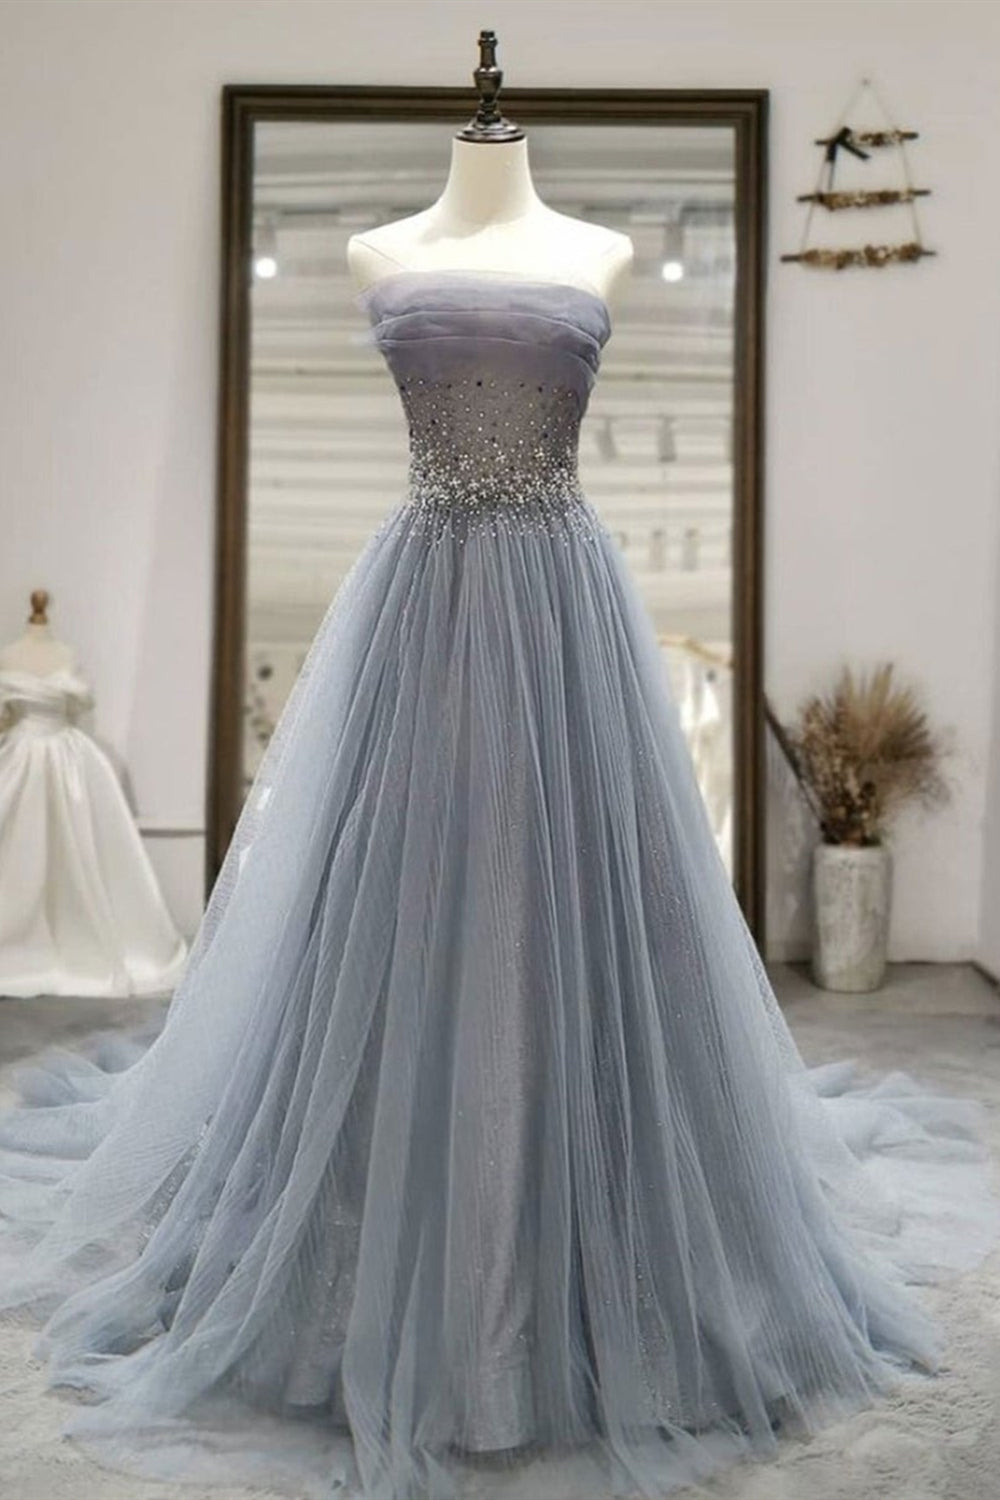 Shiny Tulle Strapless Gray Long Prom Dresses with Sequins, Gray Tulle Formal Dresses, Long Grey Evening Dresses